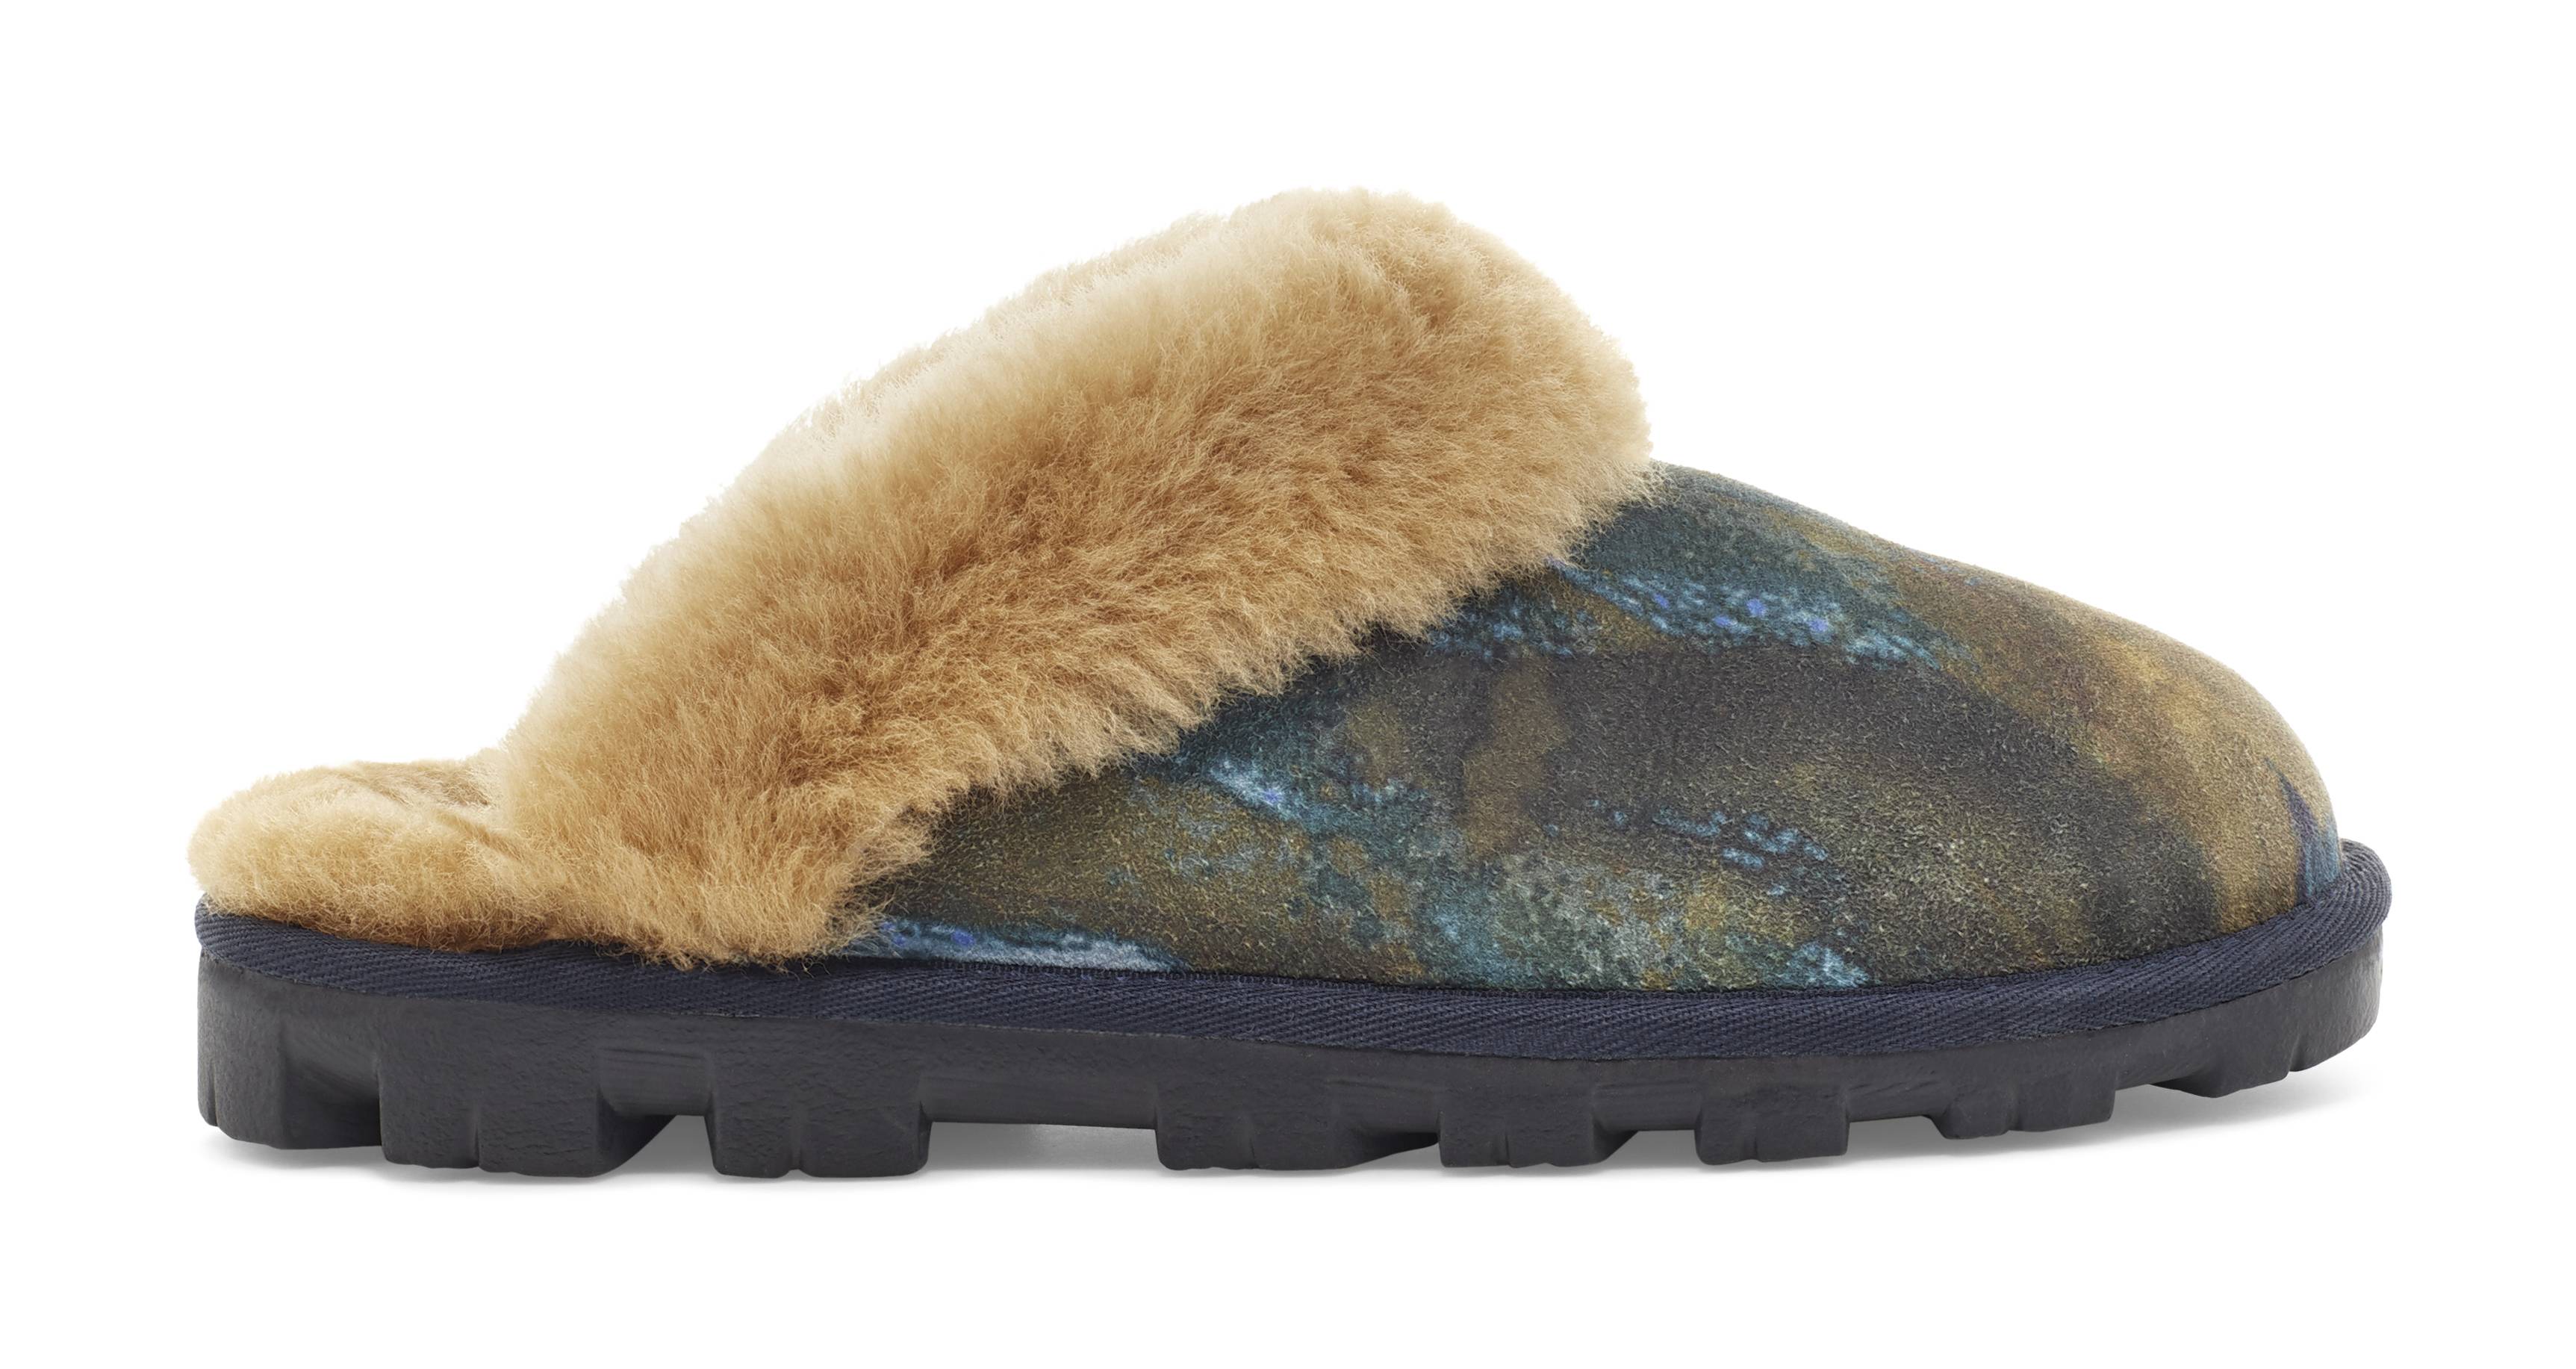 Ugg X Claire Tabouret Coquette Slippers